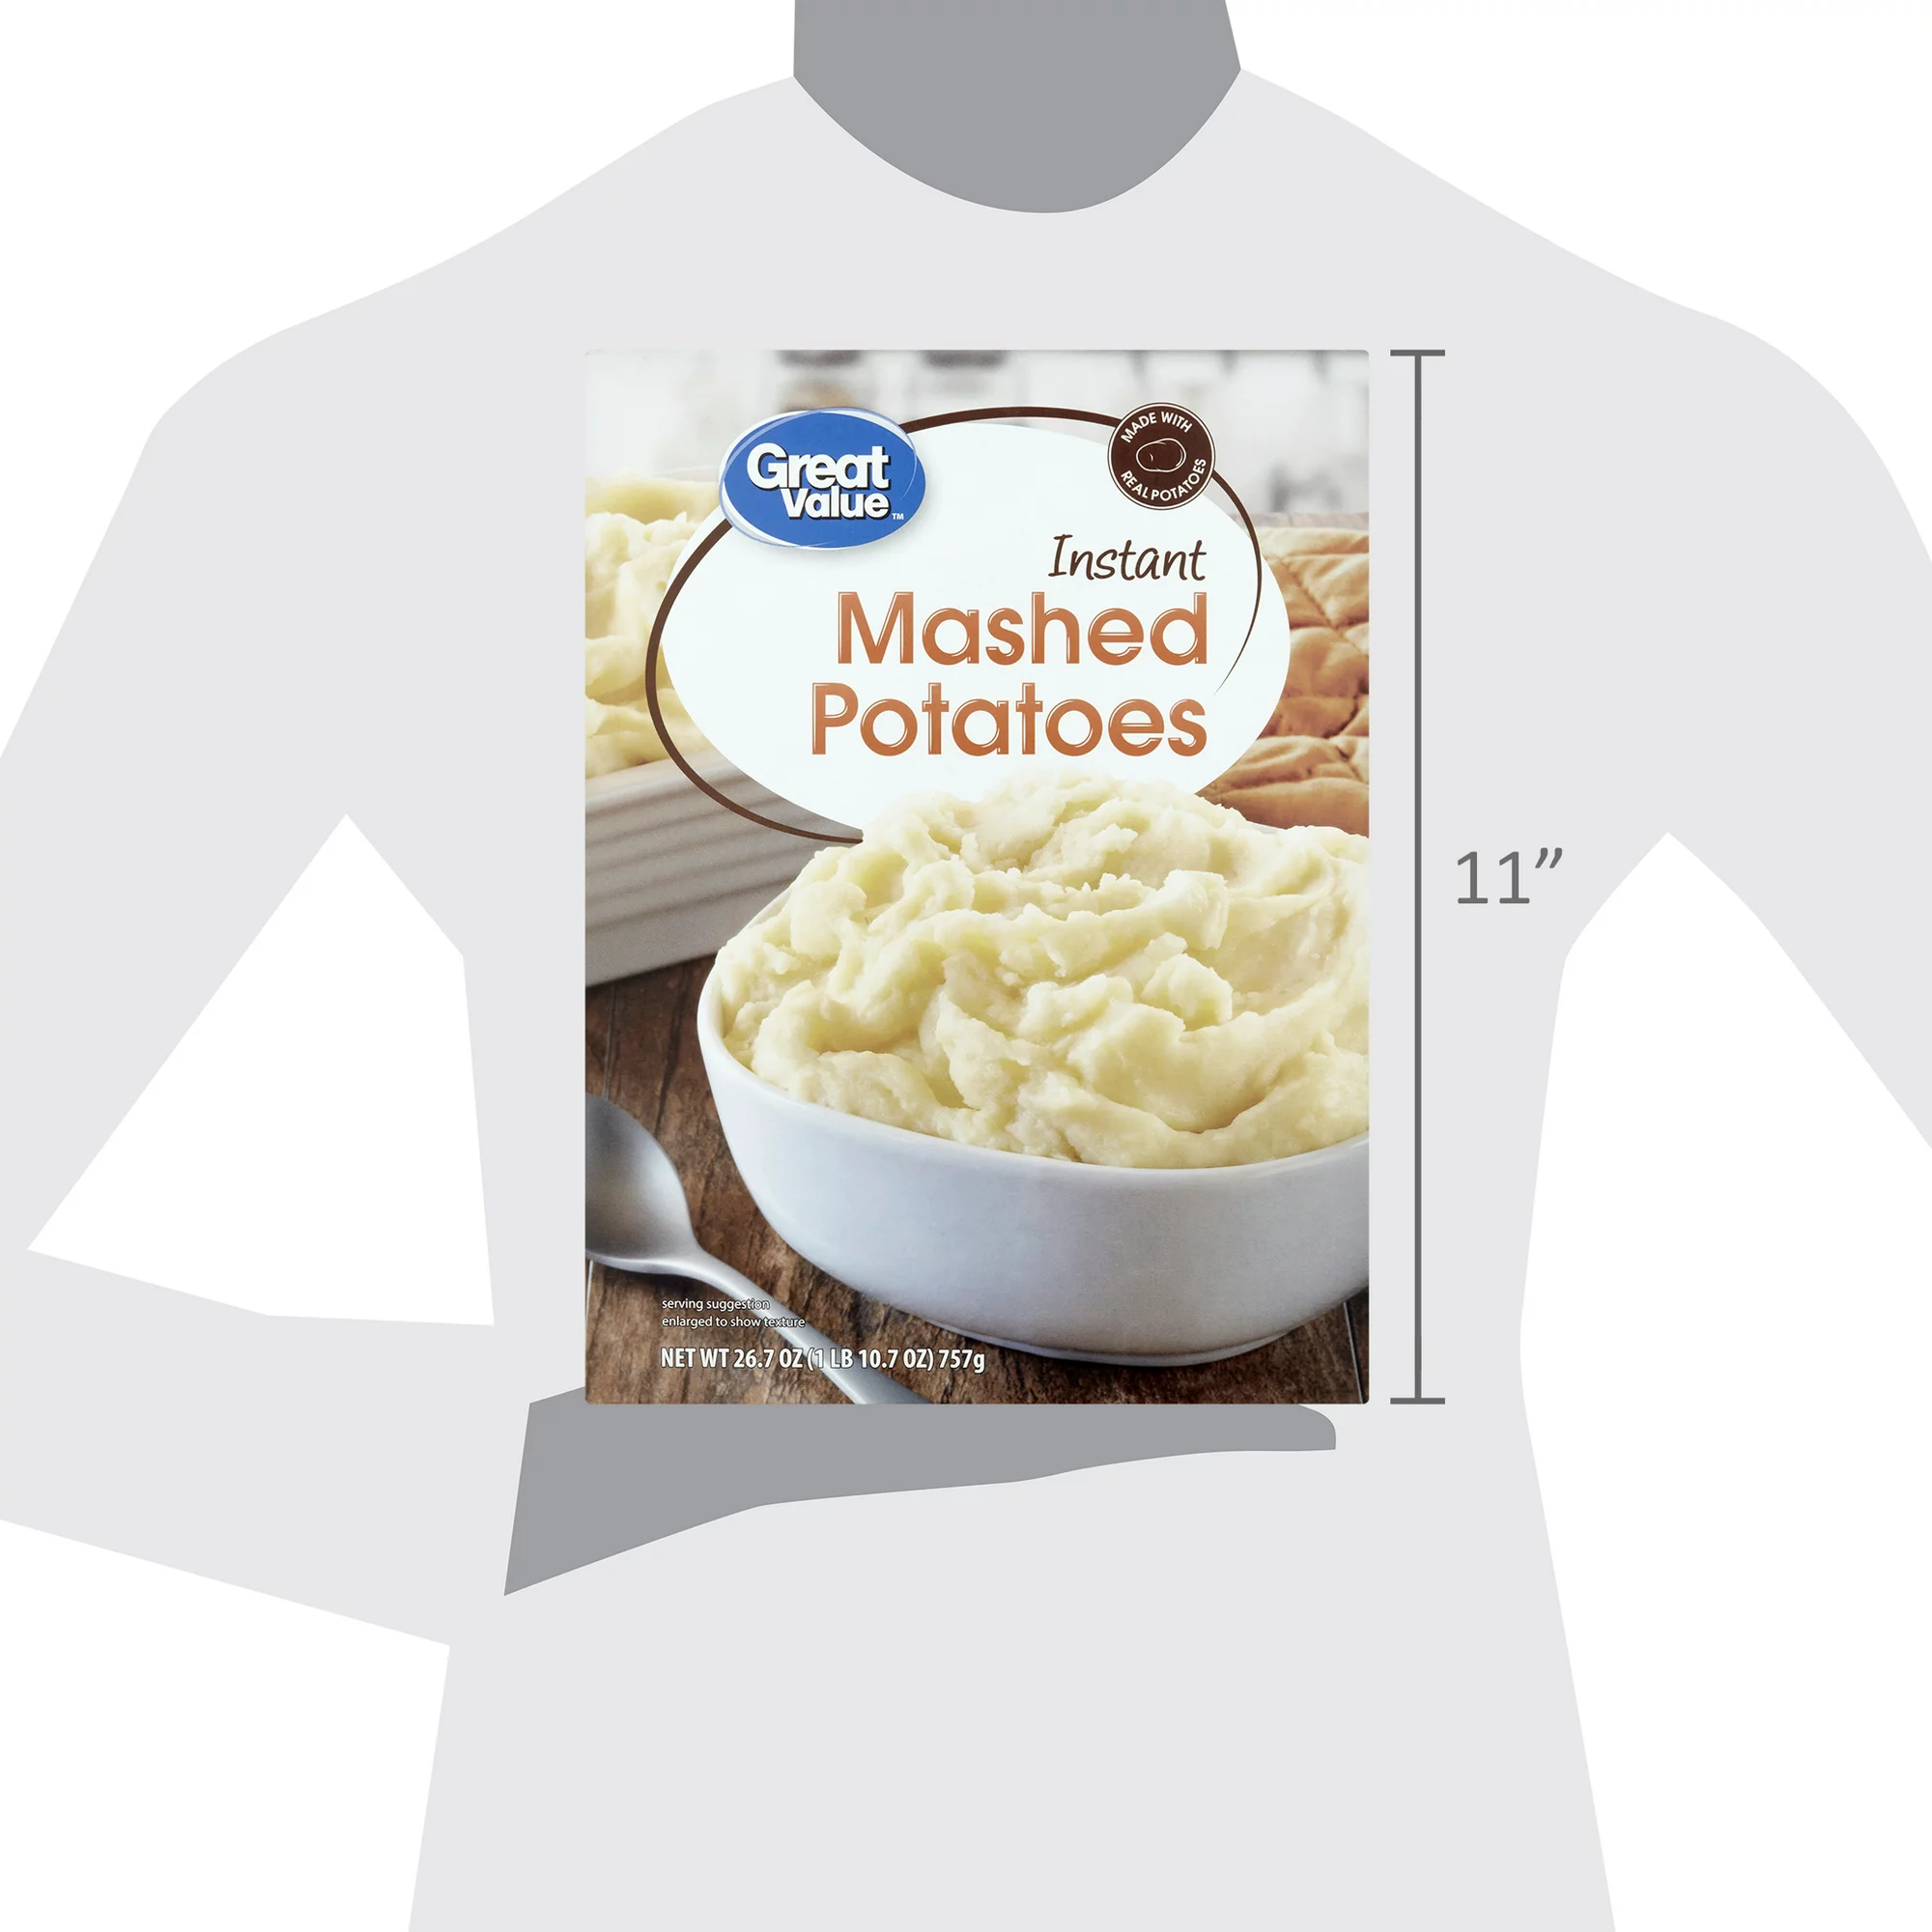 Great Value Instant Mashed Potatoes, 26.7 Oz – 7